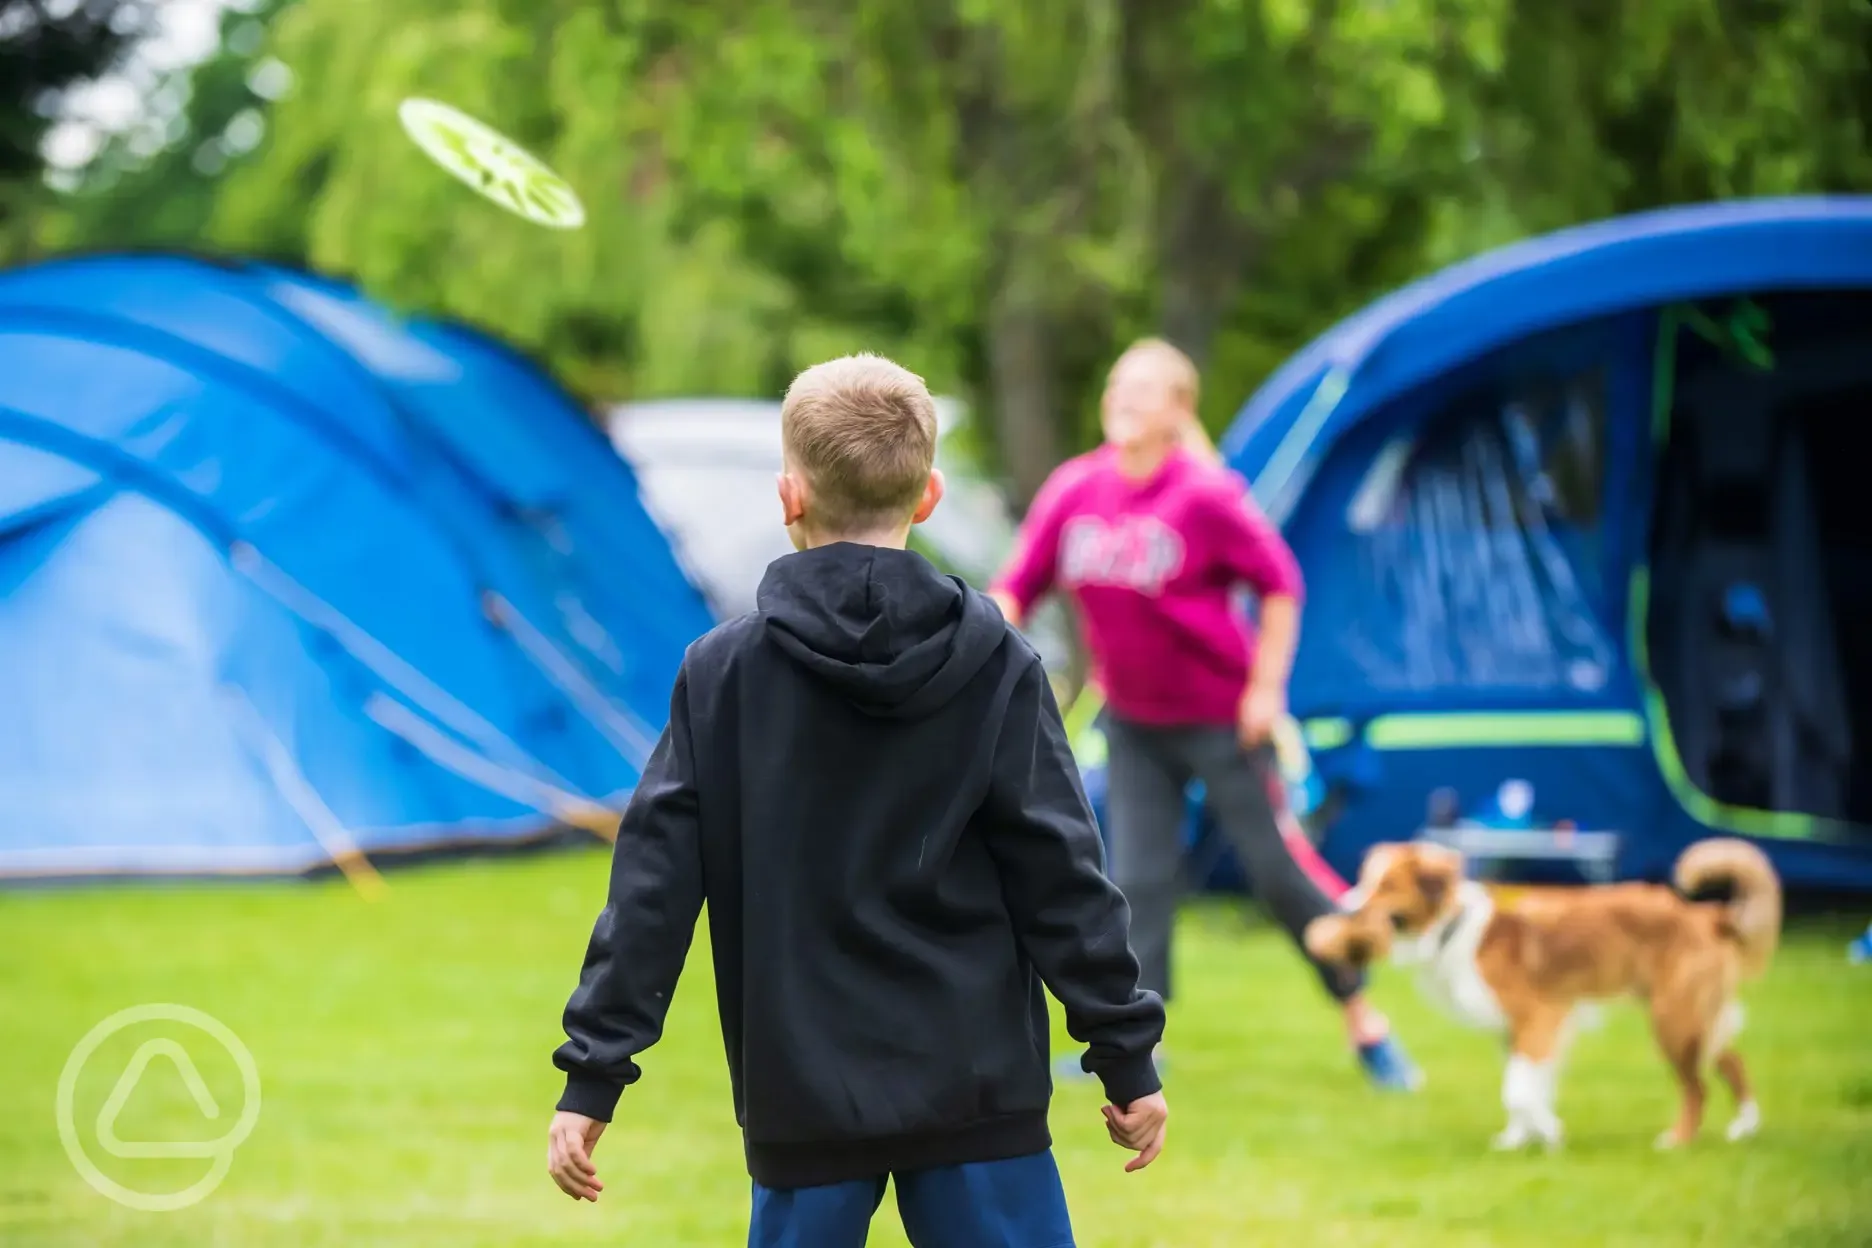 A game of frisbee on the camping field